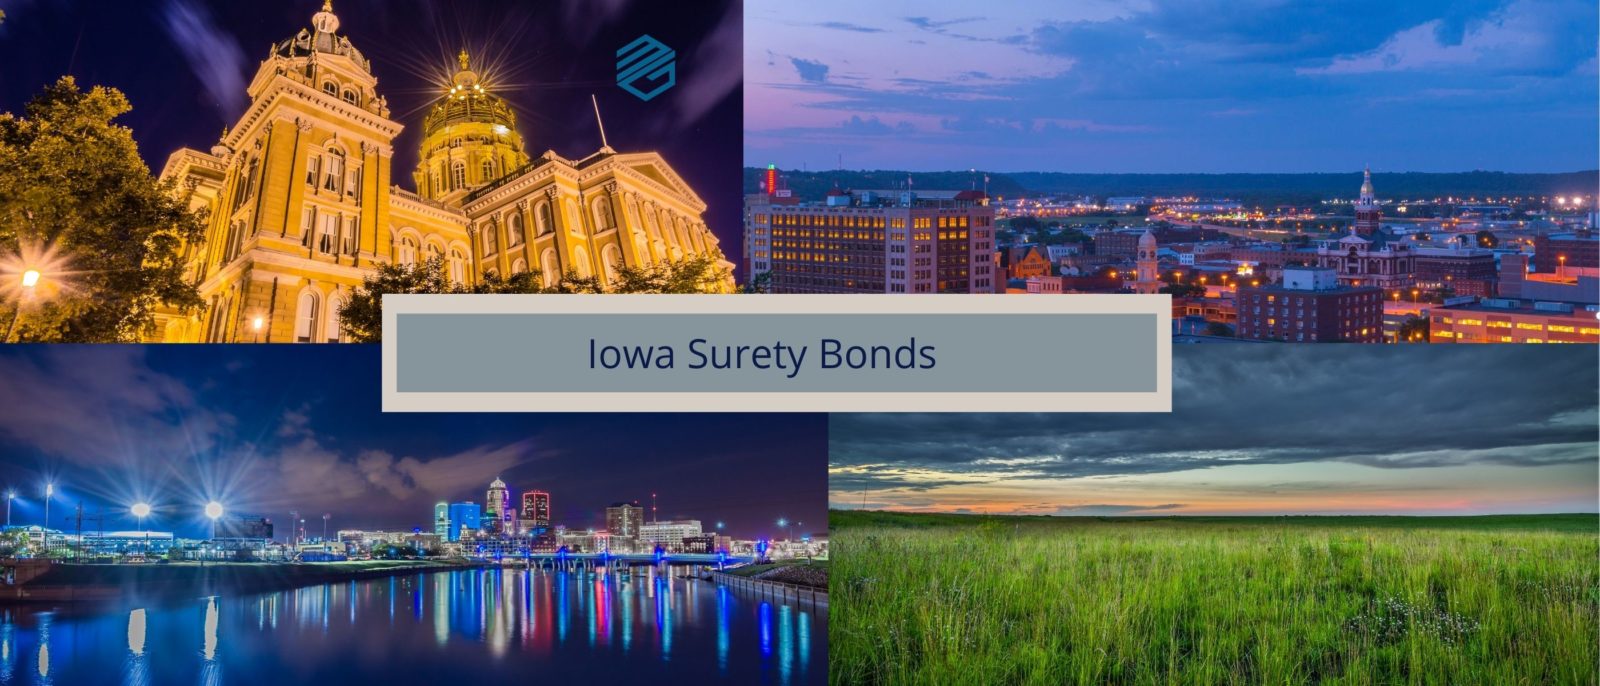 Iowa Surety Bonds - Pictures of Waterloo, Dubuque, Des Moines Iowa with the words, "Iowa Surety Bonds" in a text box.